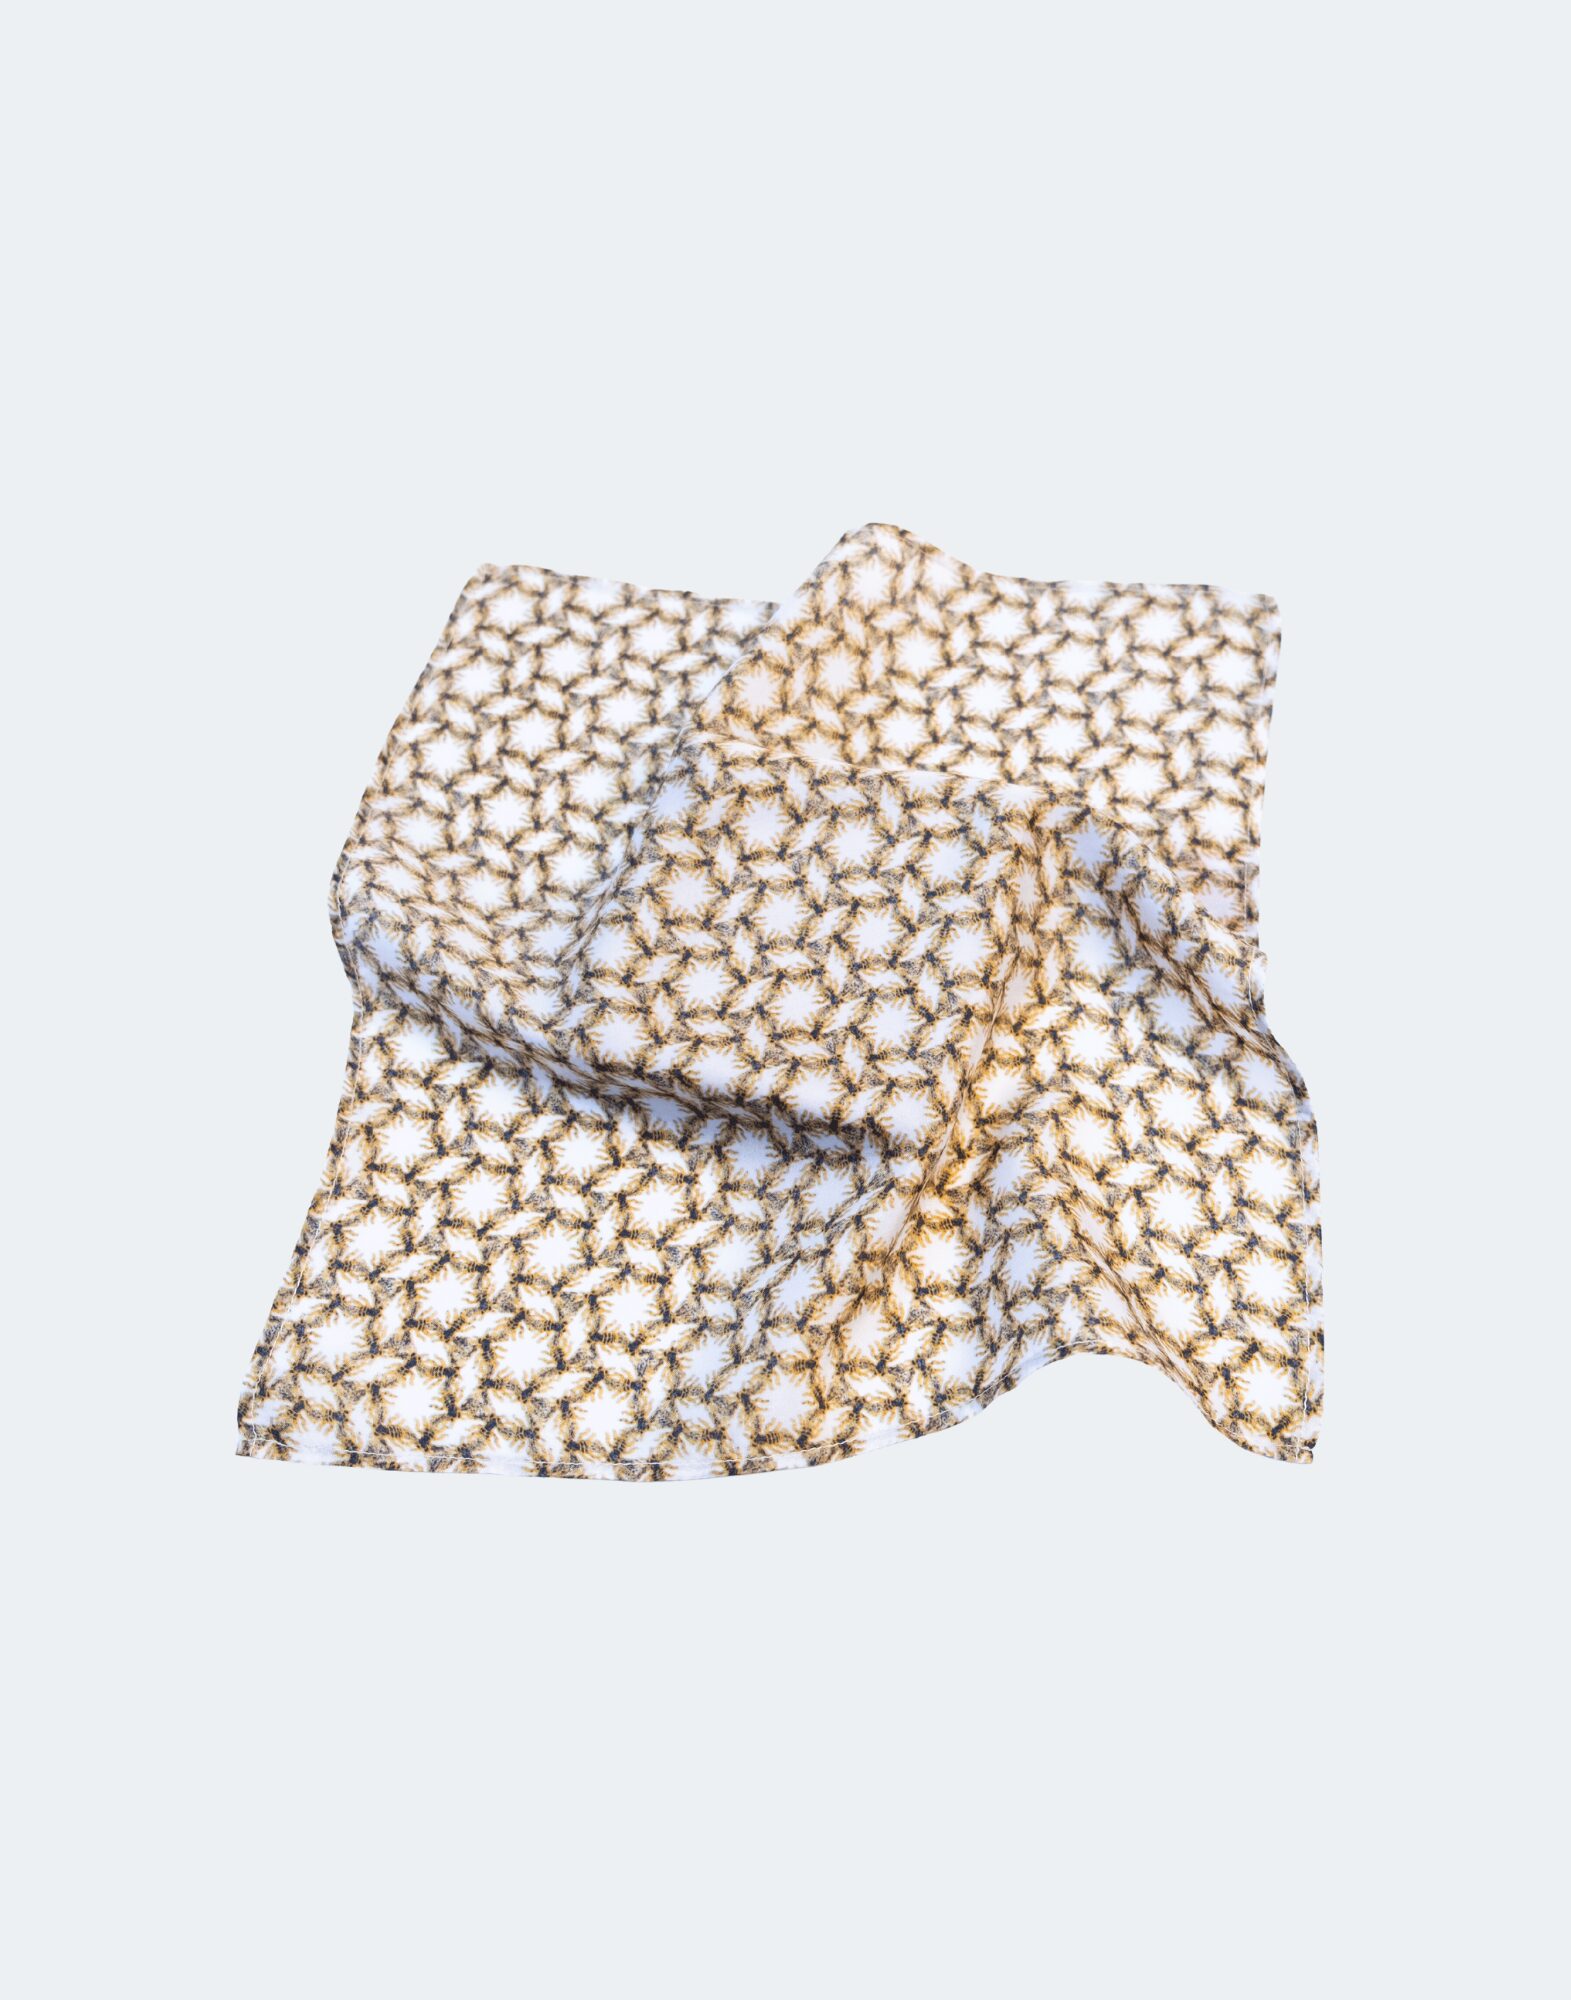 white and gold patterned flat lay pocket square